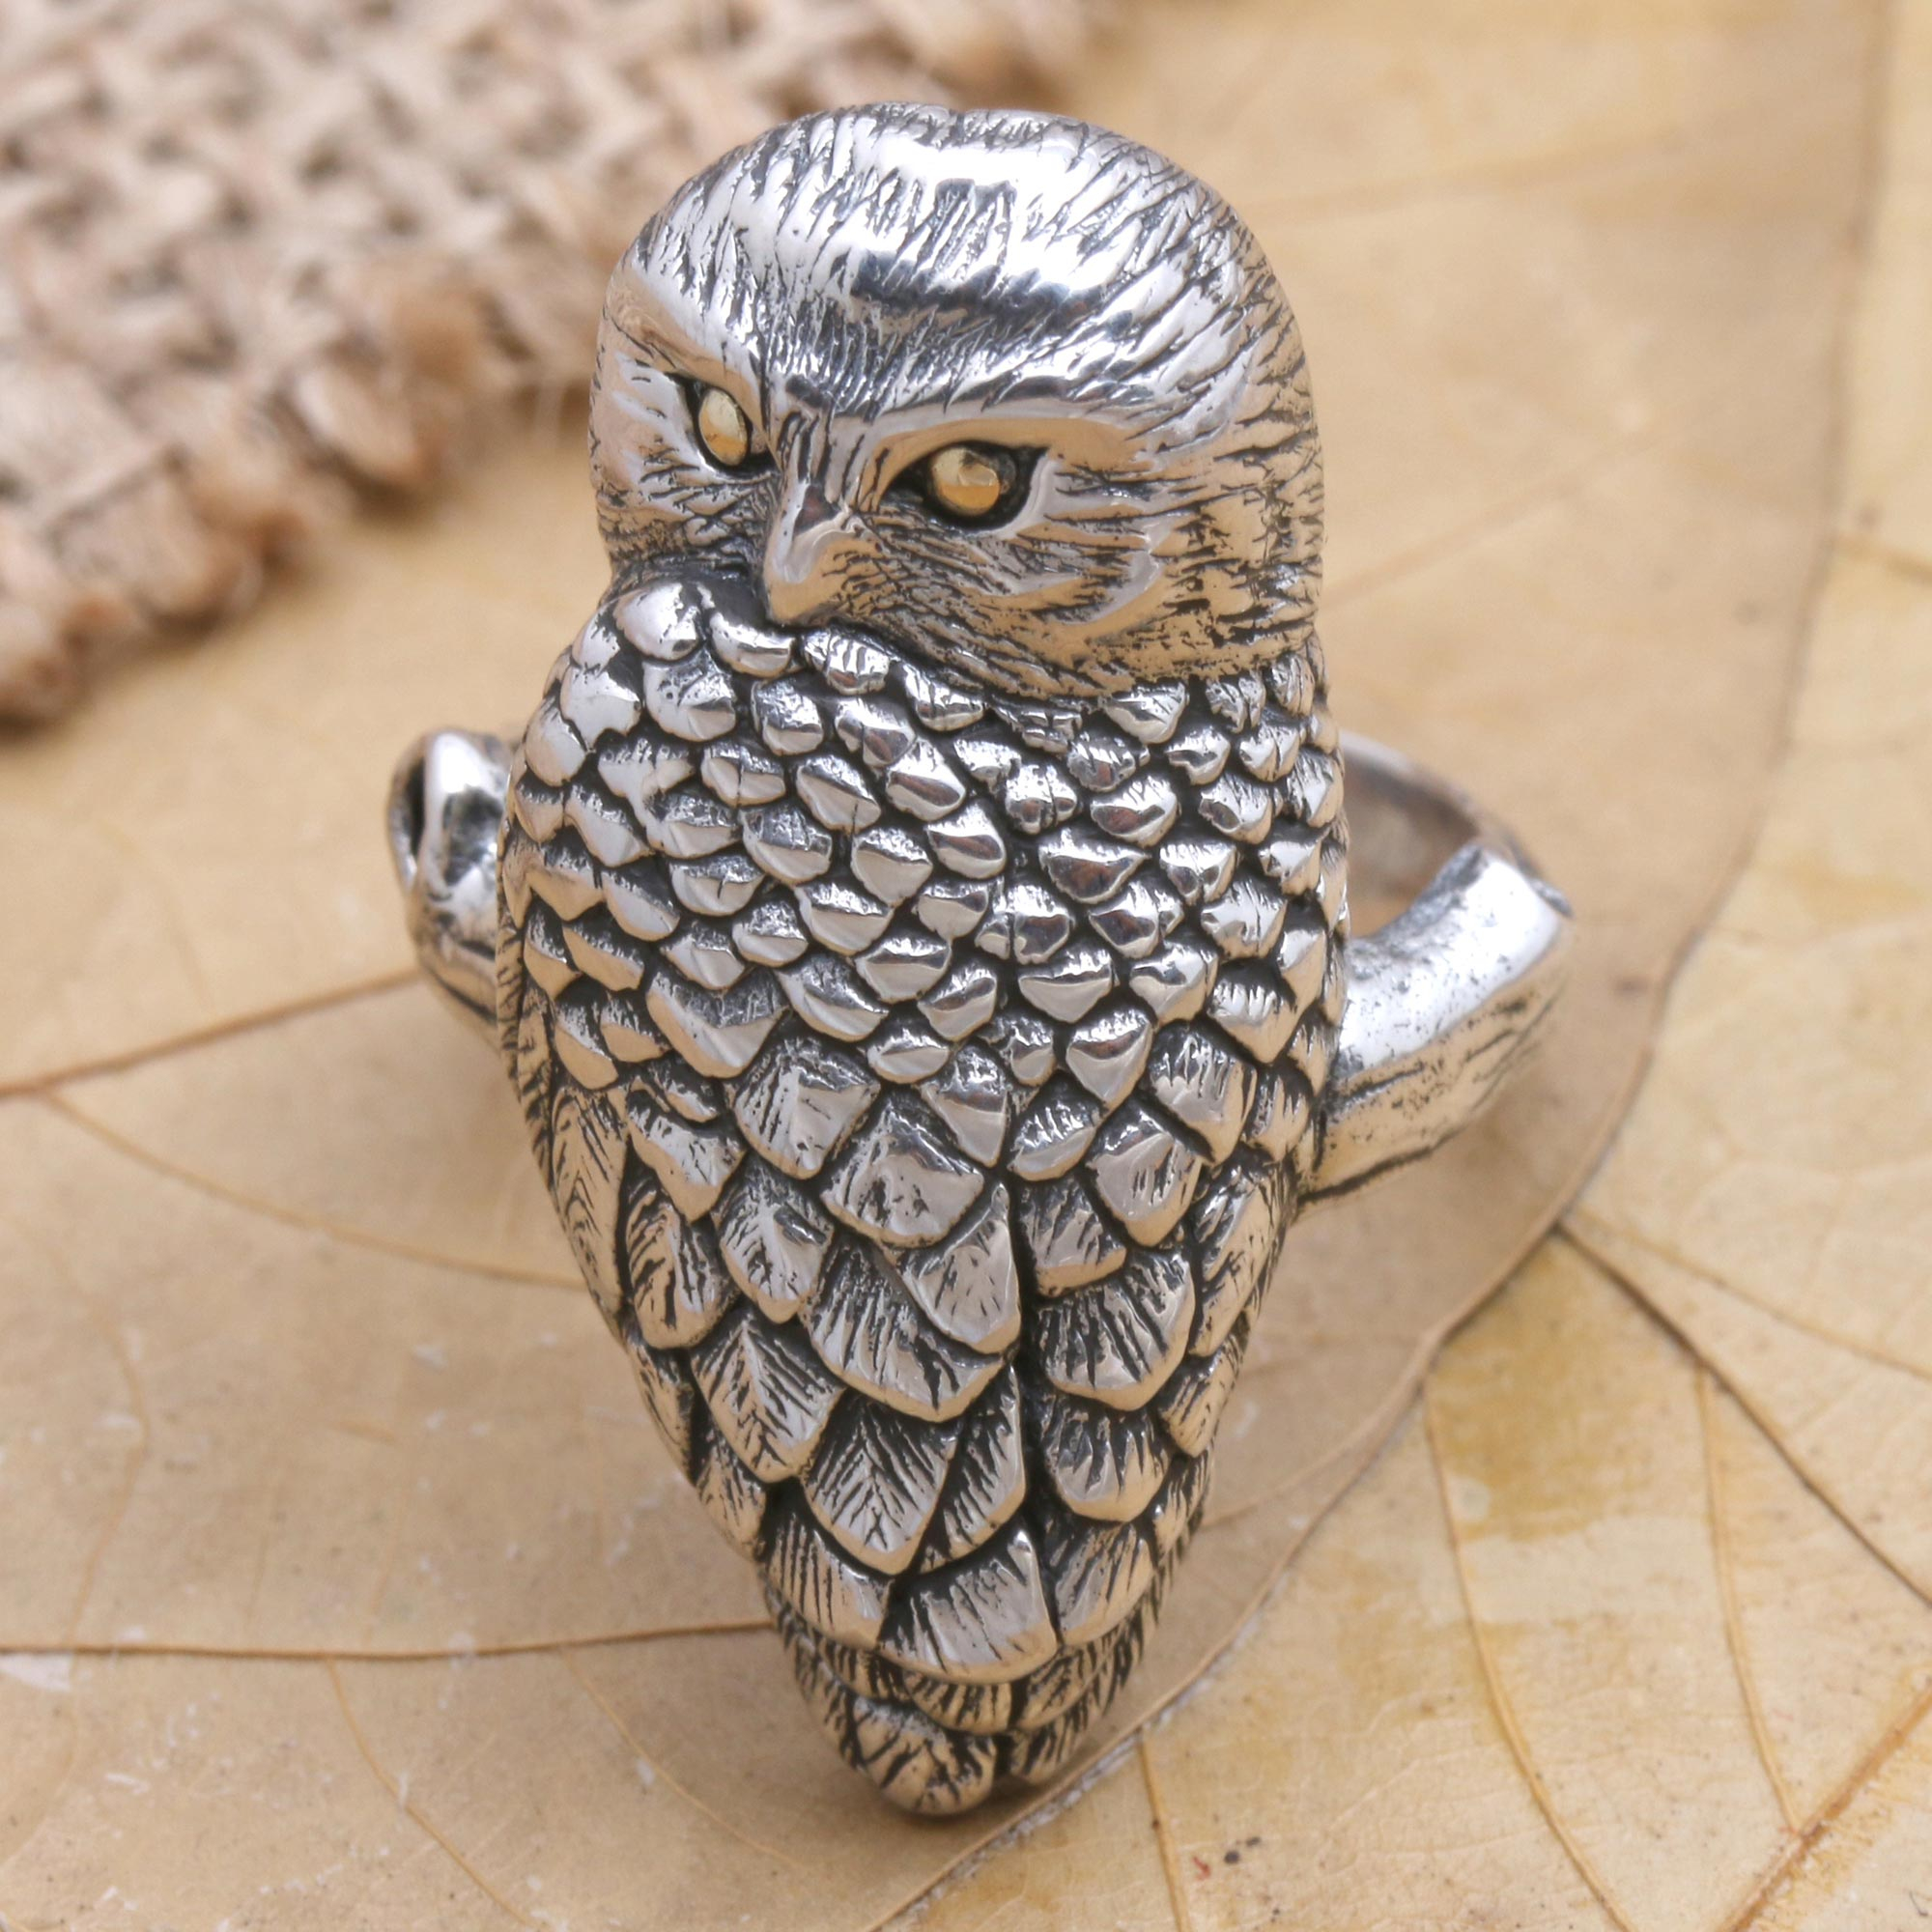 OWL RING FOR MEN AND WOMEN (ADJUSTABLE) STAINLESS STEEL SILVER PLATED RING (RED)